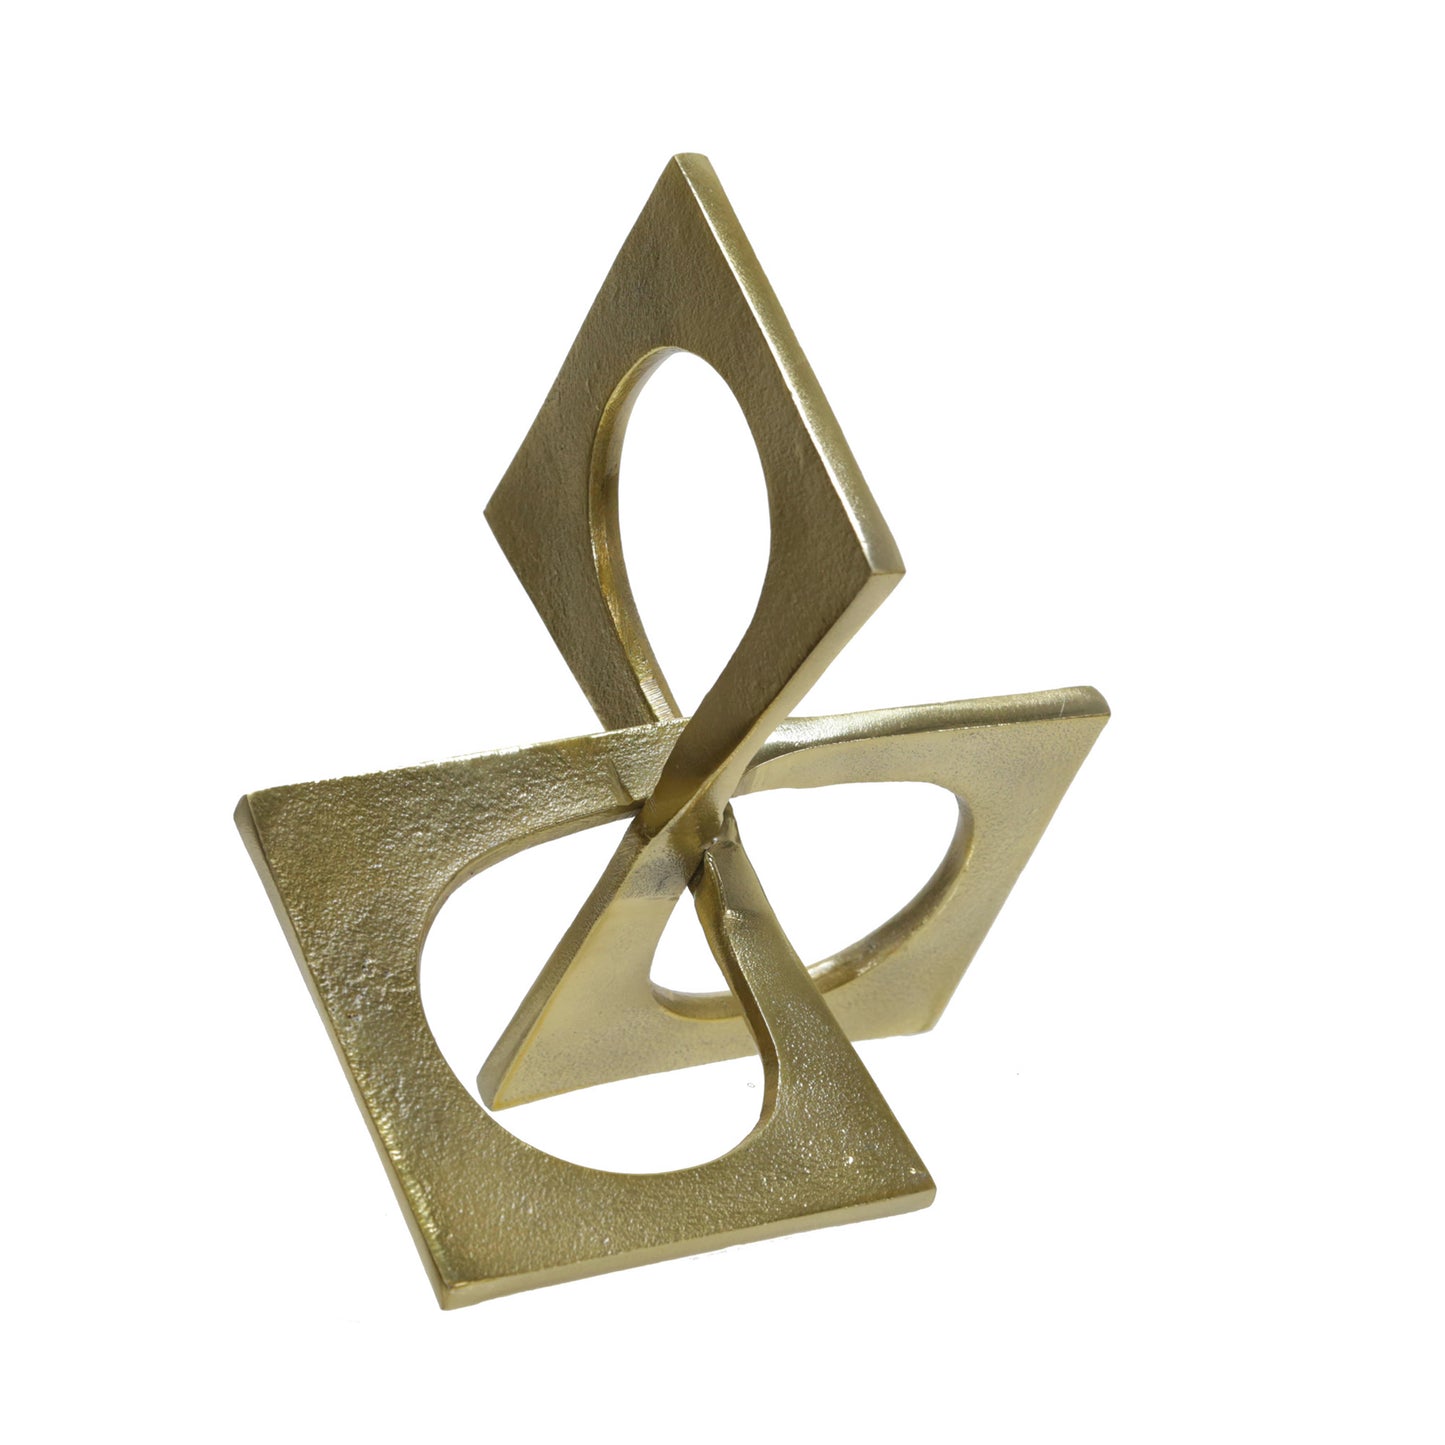 Illusion Gold Metal Object